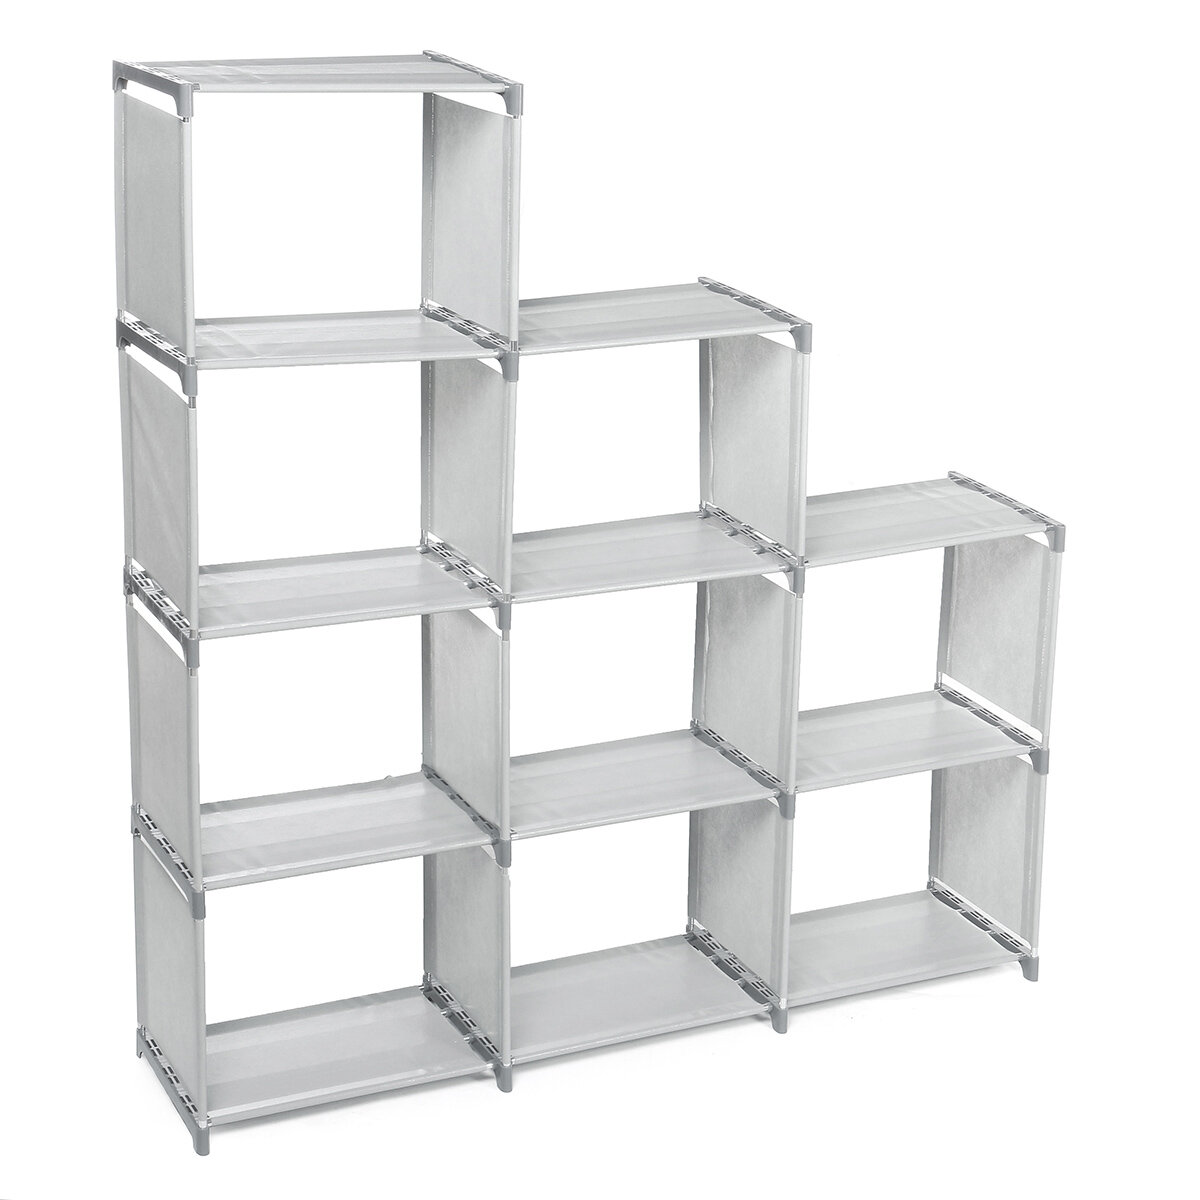 Image of Combination Racks Organize Student Storage Racks Simple and Modern Style for Home Supplies